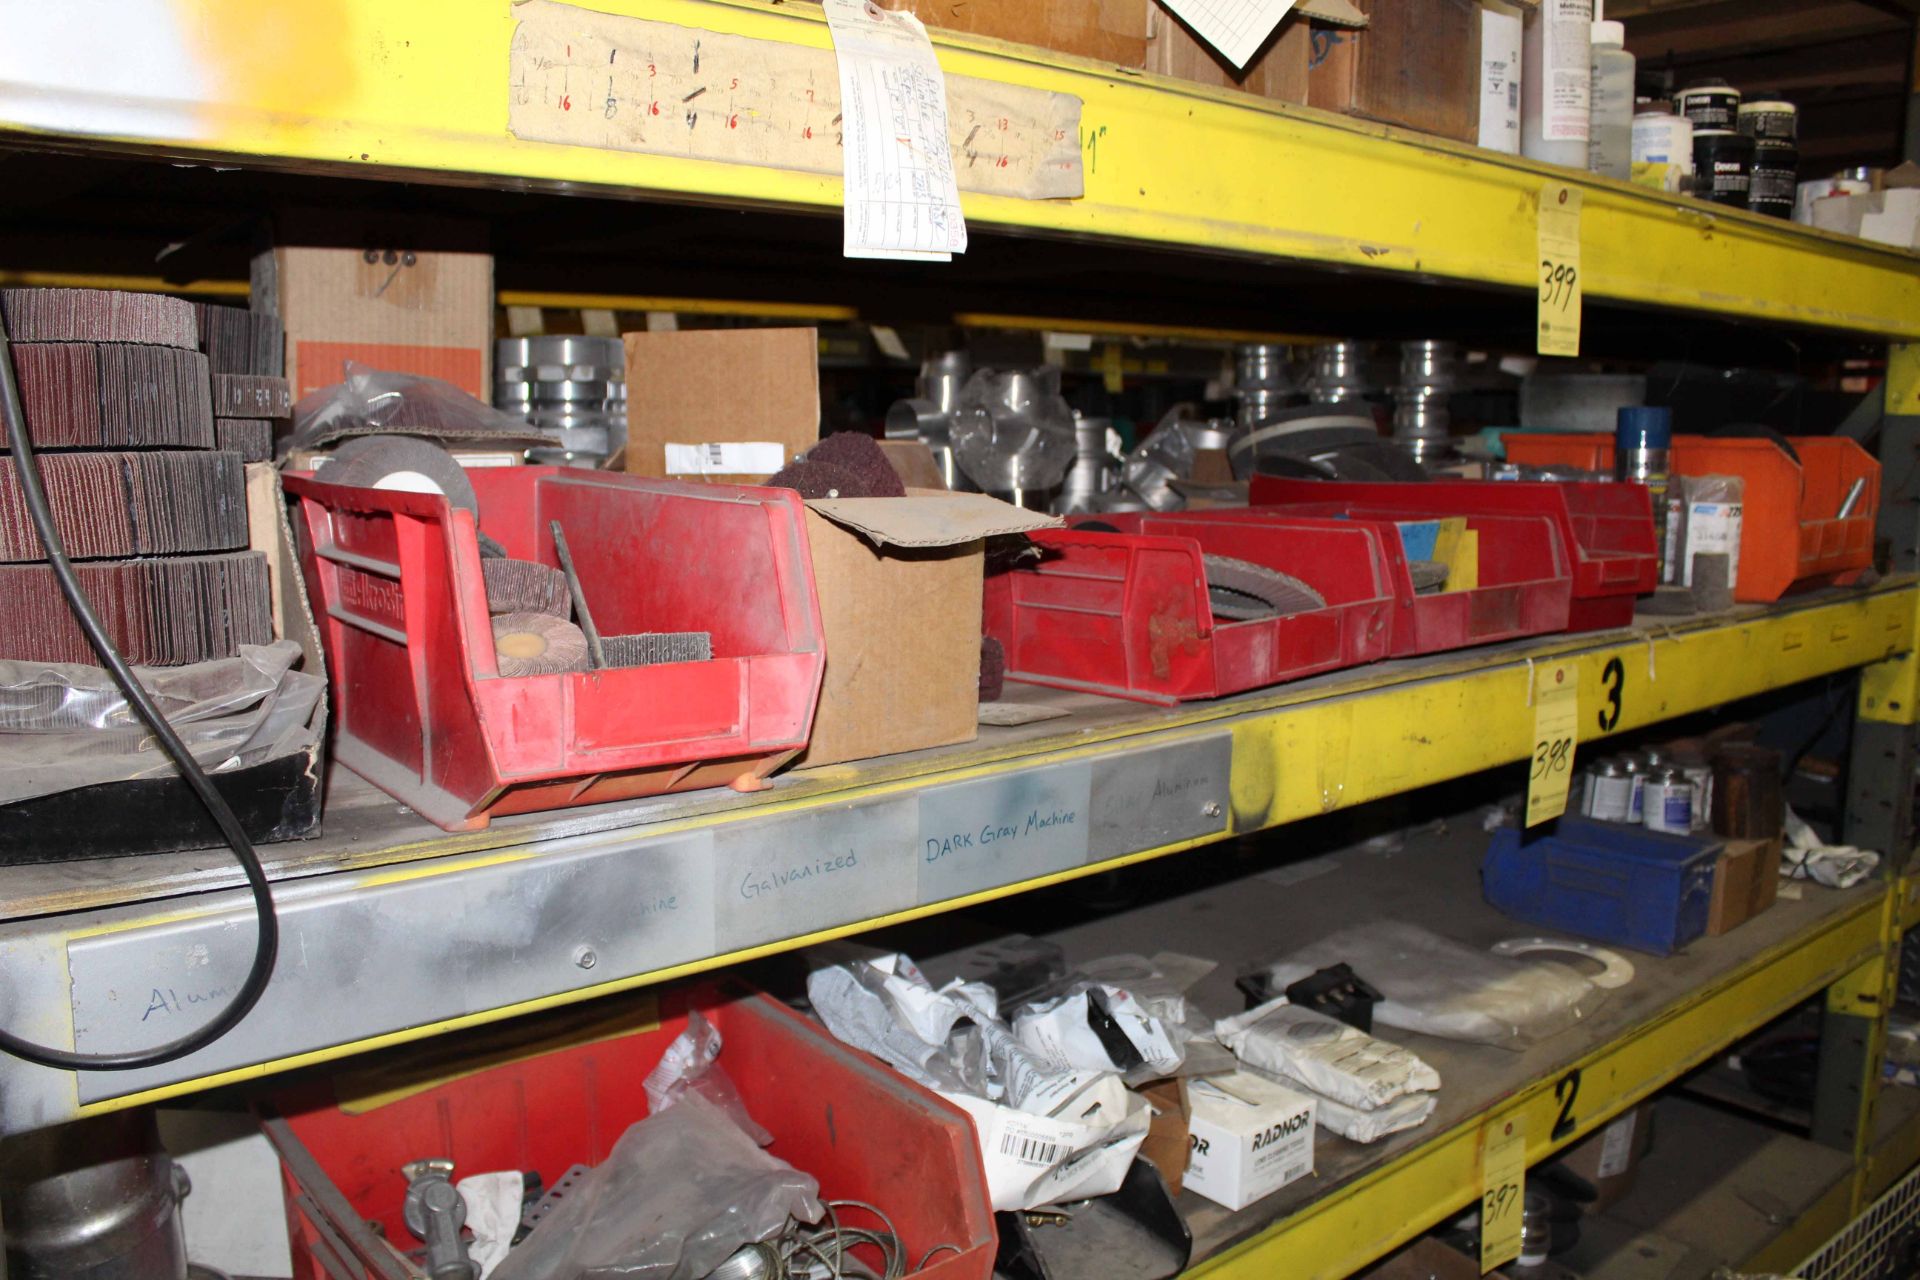 LOT CONSISTING OF: trailer items & abrasives, misc. (on one shelf)